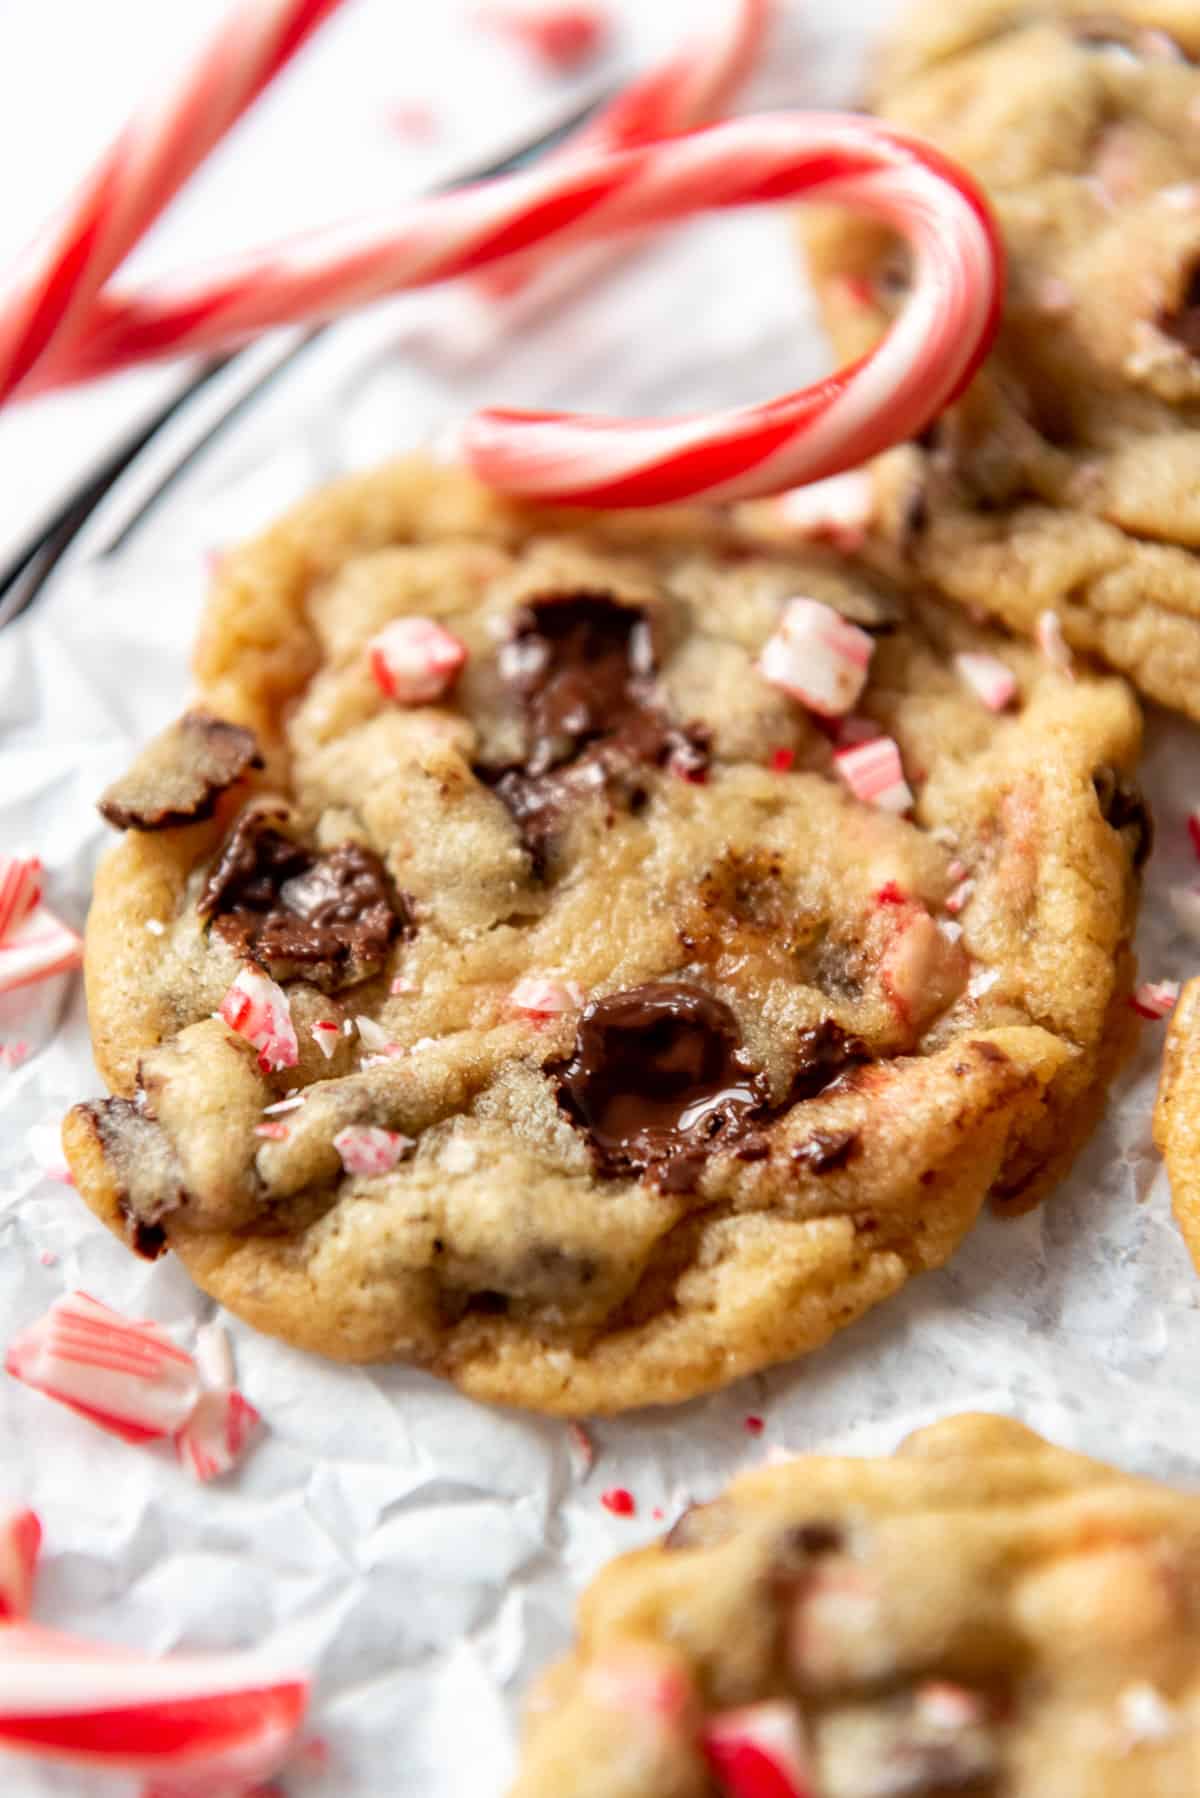 A thin peppermint chocolate chip cookie made with broken up candy canes.